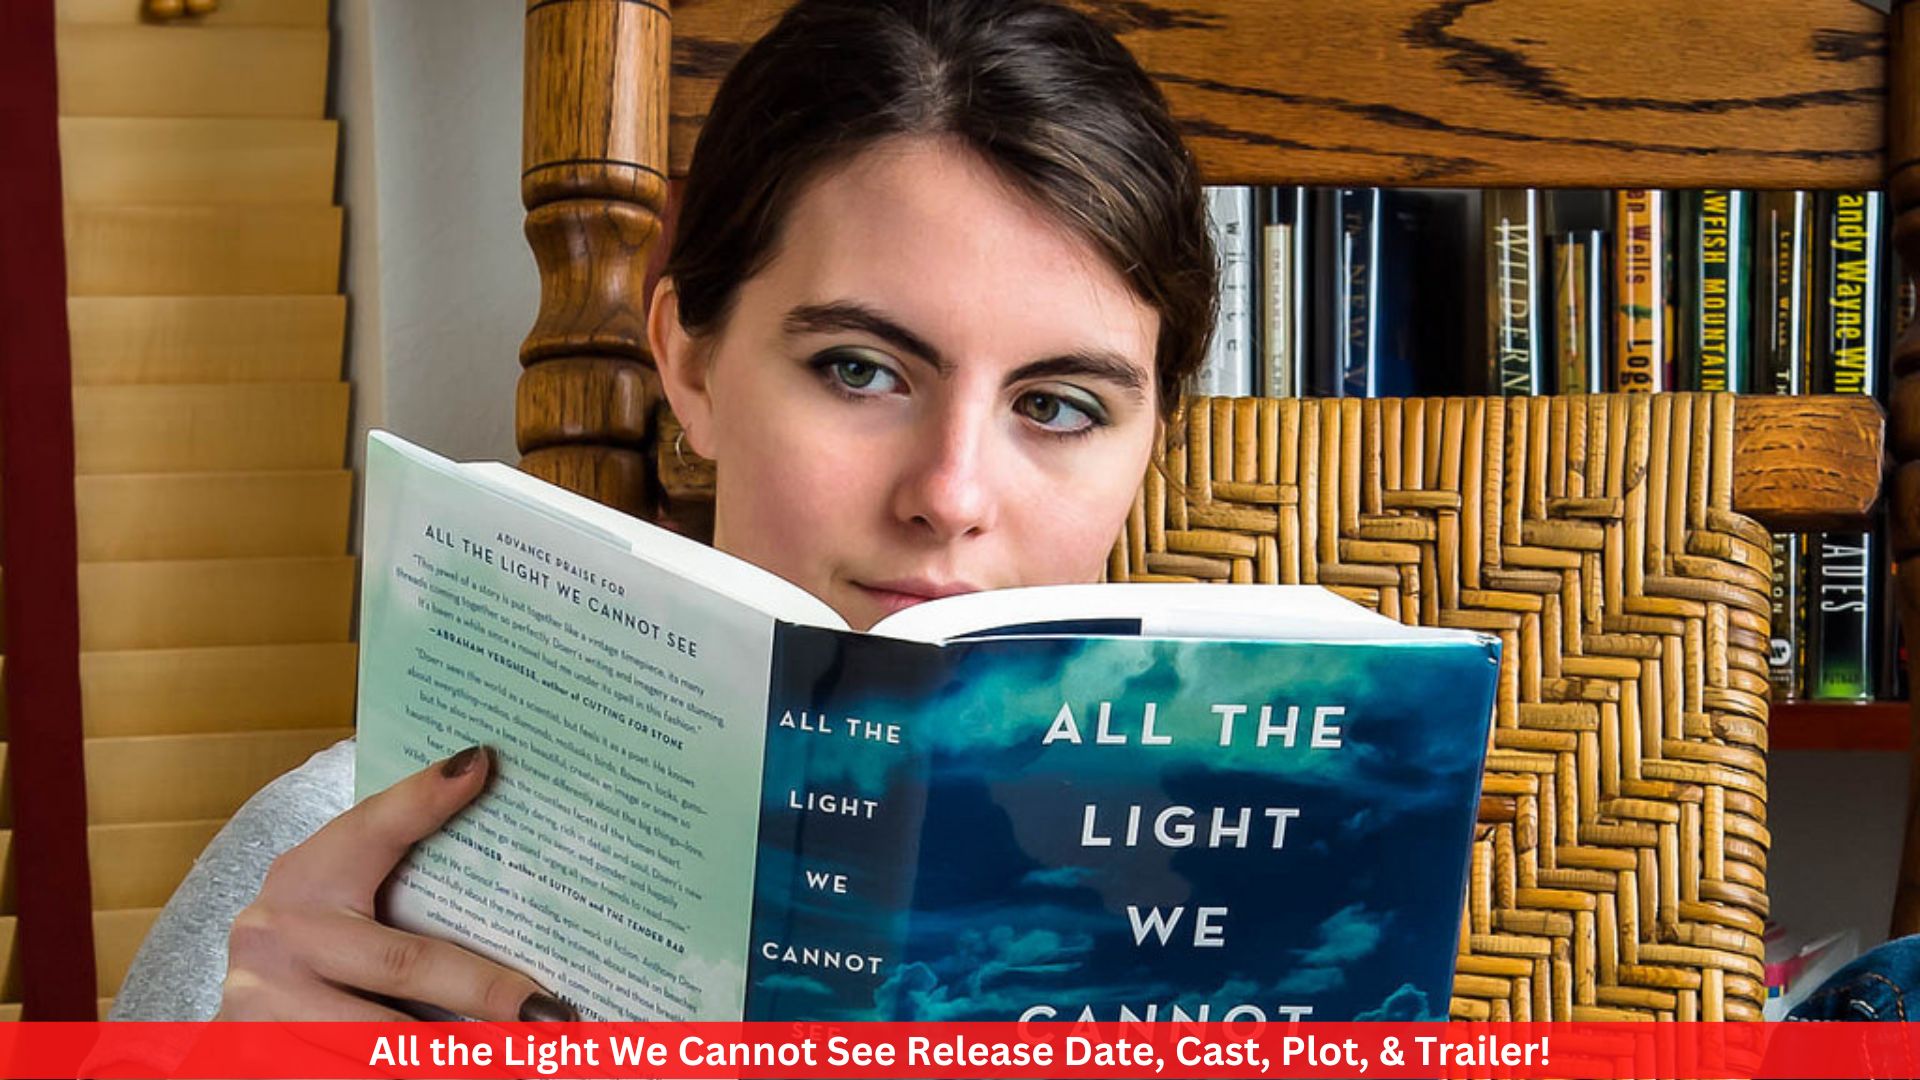 All the Light We Cannot See Release Date, Cast, Plot, & Trailer!